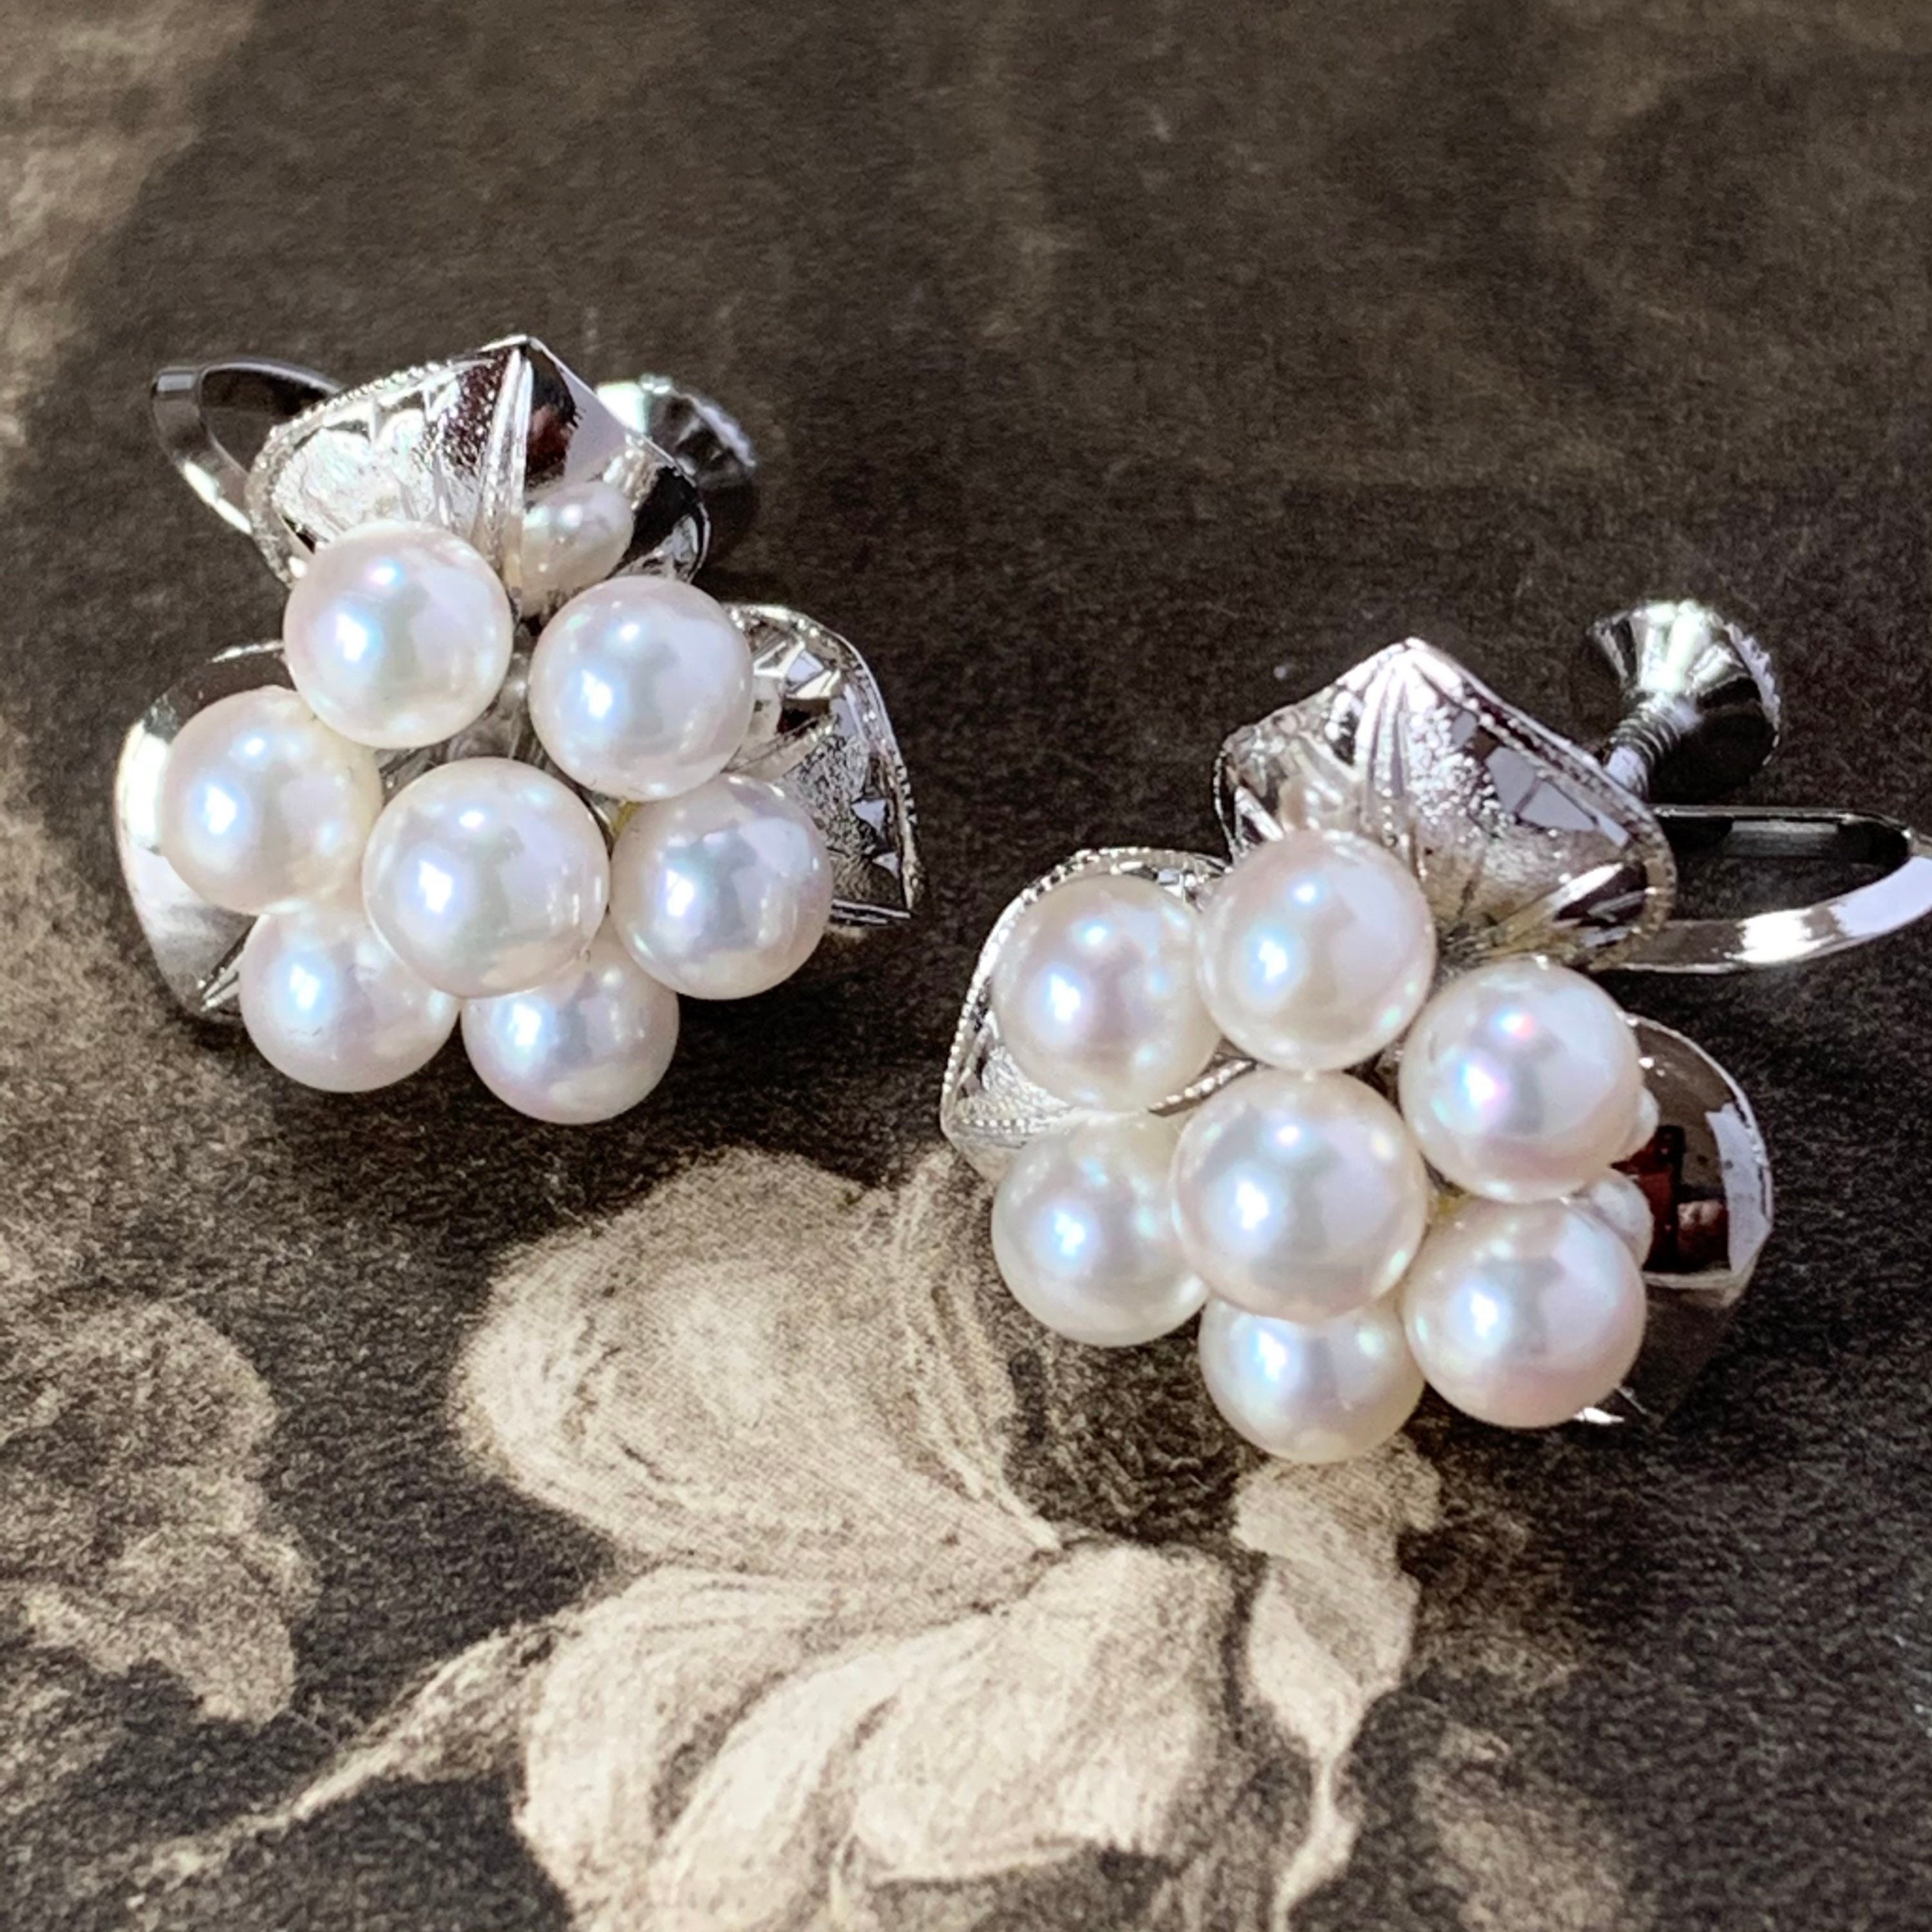 Pair Of Exquisite Vintage Pearl Multi-Cluster Earrings, Each Featuring A Captivating Petal Design Adorned With Seven Lustrous Pearls